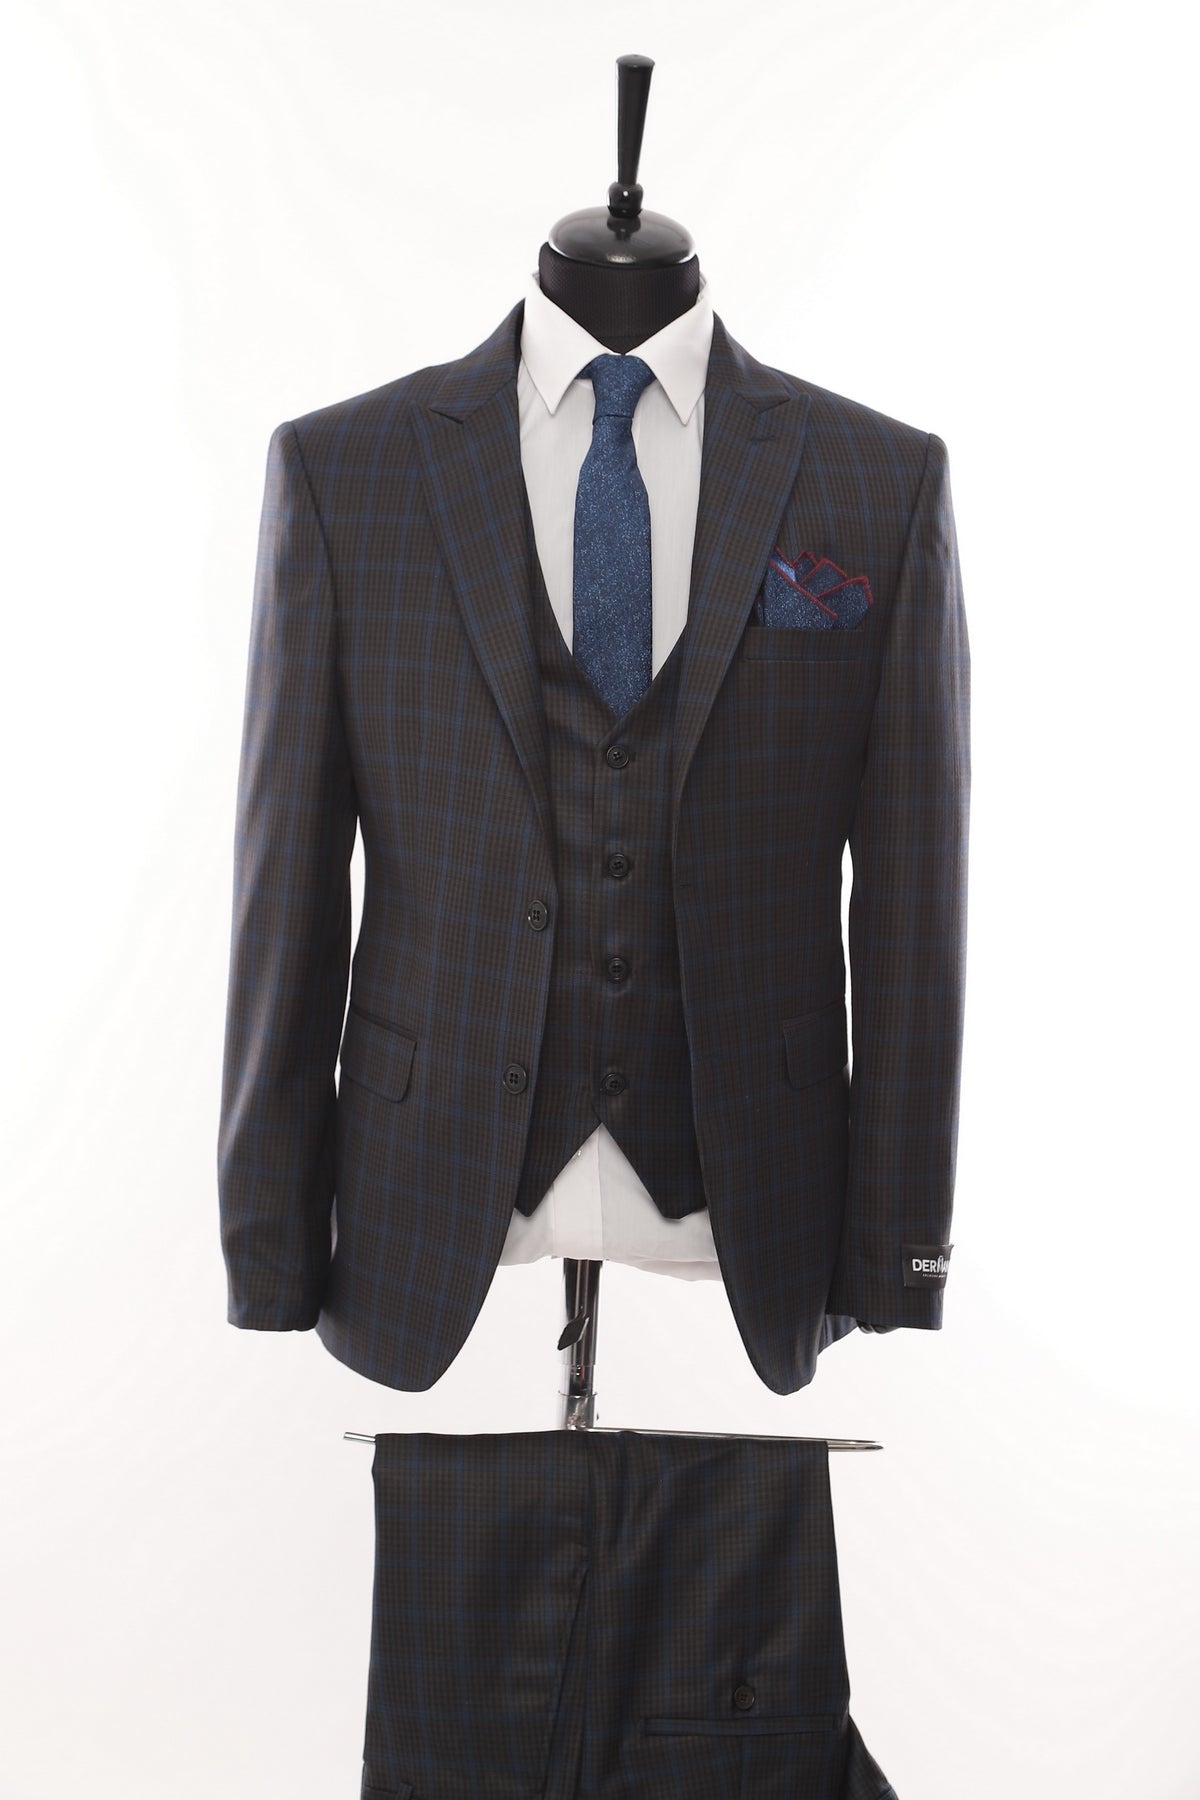 Grey Square Patterned Fabric 3 Piece Suit